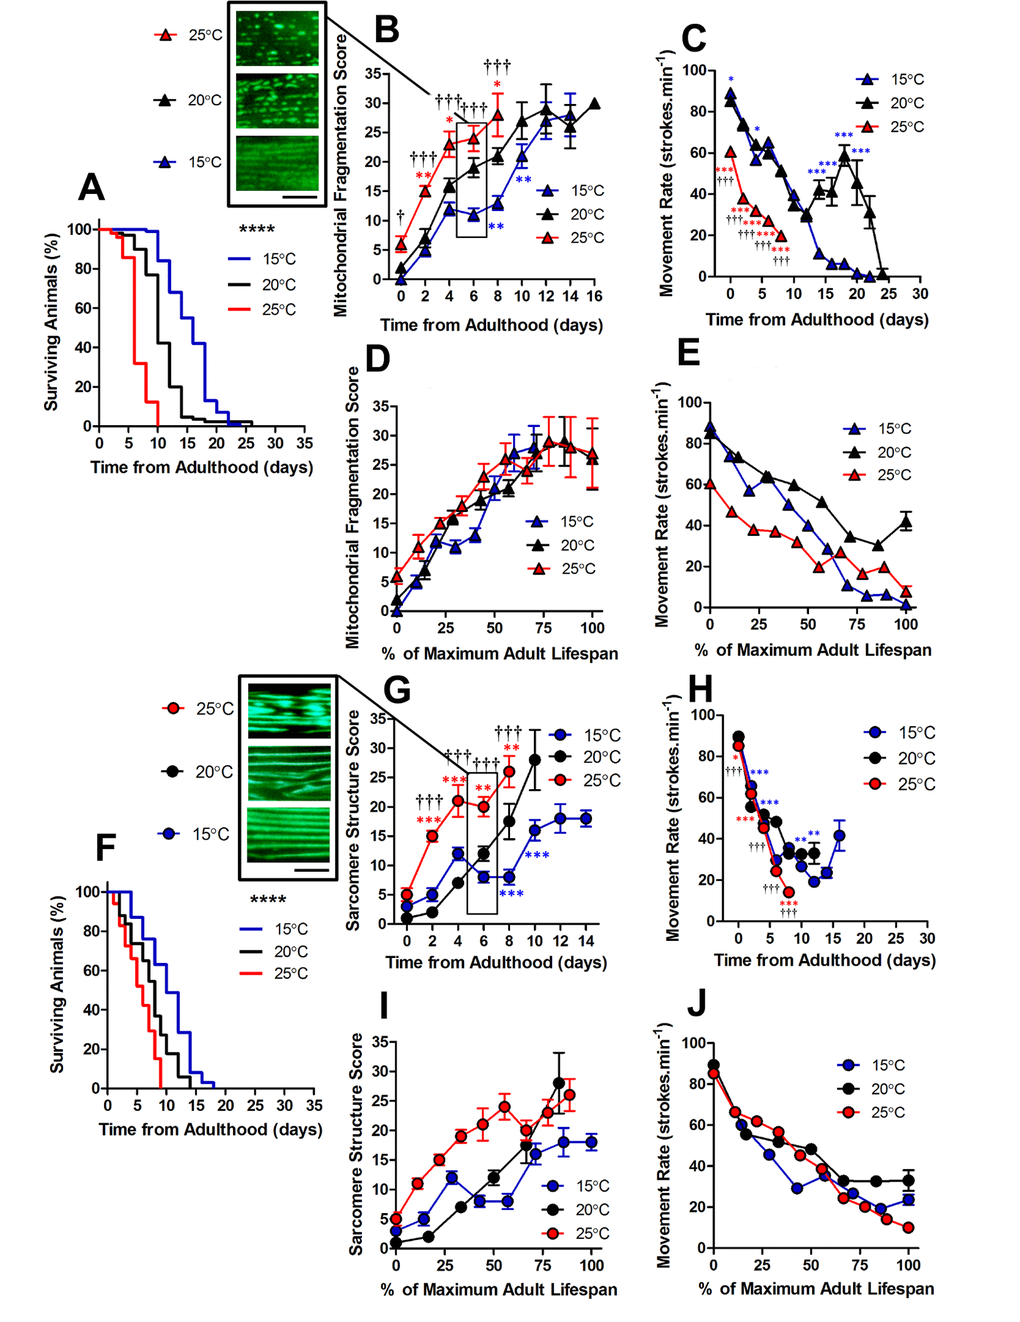 Changes in lifespan did not change the order of progression of sub-cellular defects in C. elegans. (A) Temperature was used to lengthen (15°C) and shorten (25°C) lifespan in comparison to control (20°C) in animals with GFP-labelled mitochondria (median lifespan of 16d at 15°C vs. 10d at 20°C vs. 6d at 25°C, PB) Mitochondrial fragmentation is greater at 25°C and lesser at 15°C across the lifespan. (C) Movement across the adult lifespan in GFP-labelled mitochondria is lower in 25C than other temperatures throughout the lifespan. (D) When data were expressed as % maximal lifespan the temporal progression of mitochondrial fragmentation was similar between strains. (E) When expressed as % maximal lifespan, the movement decline between 20°C and 25°C was similar to 50% of maximal lifespan. (F) Temperature was used to lengthen (15°C) and shorten (25°C) lifespan in comparison to control (20°C) in animals with GFP-labelled sarcomeres (median lifespan of 10d at 15°C vs. 8d at 20°C vs. 6d at 25°C, PG) Decline in sarcomere structure was accelerated in animals at 25°C across the lifespan and sarcomere structure was preserved in 15°C compared to 20°C from 6d onwards. (H) Movement rates in animals with GFP-labelled sarcomeres were lower in animals at 25°C throughout the lifespan (I) Expressing data as % maximal lifespan did not appear to change the relationship between defect progression at different temperatures. (J) Movement expressed as % maximal lifespan shows that the rate of decline scales to lifespan. All data are presented as mean ± SEM. Scale bars in (B) and (G) represent 10 μm.